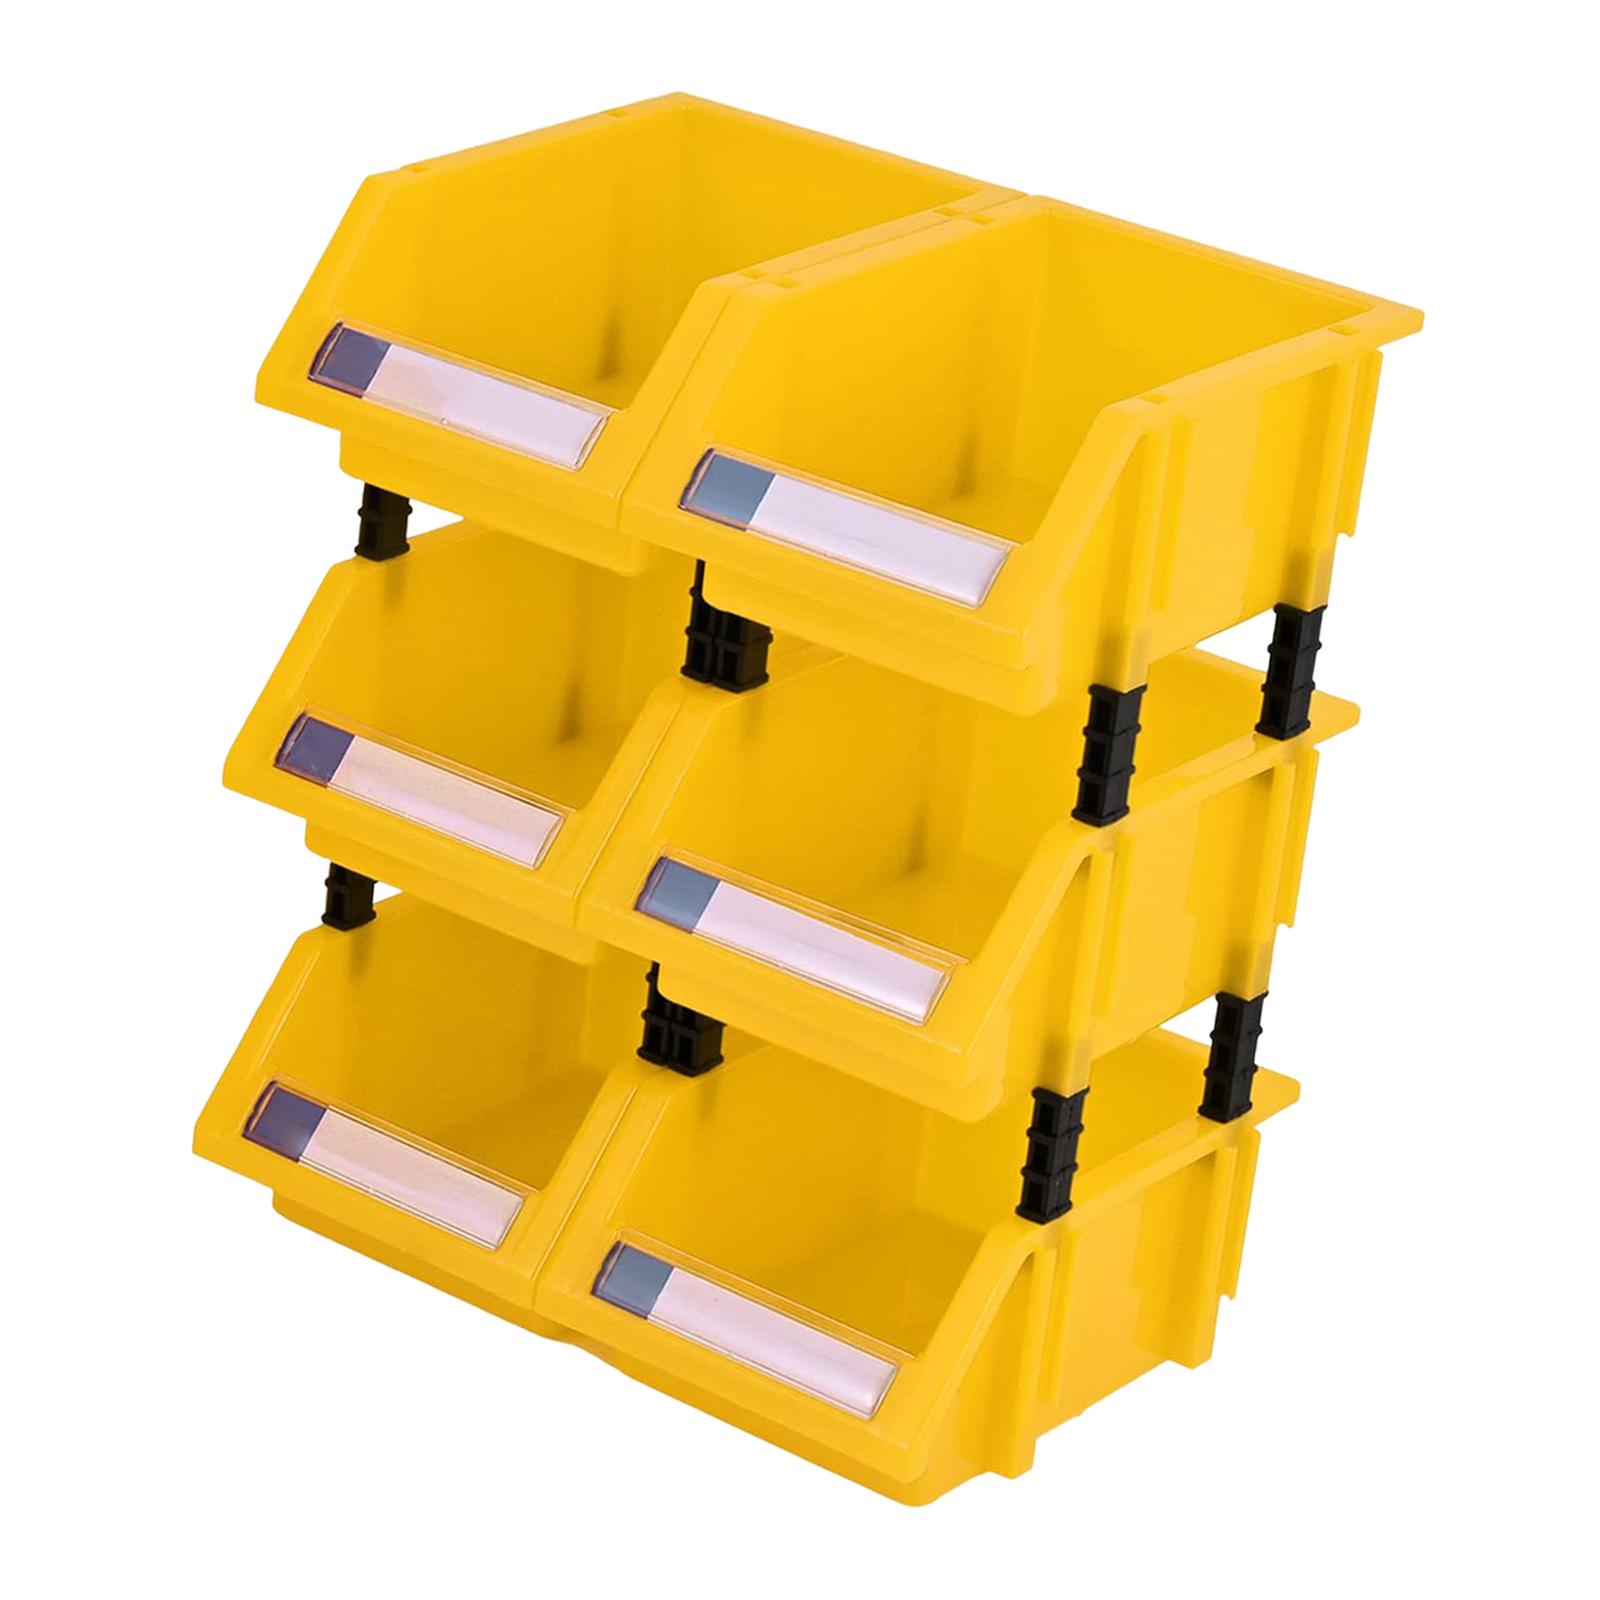 6x Nail and Screw Storage Bins Hardware Storage Organizer with 4 Connect  Pillars, Hardware Tool Case for Beads Buttons Garage Workshop Home Yellow